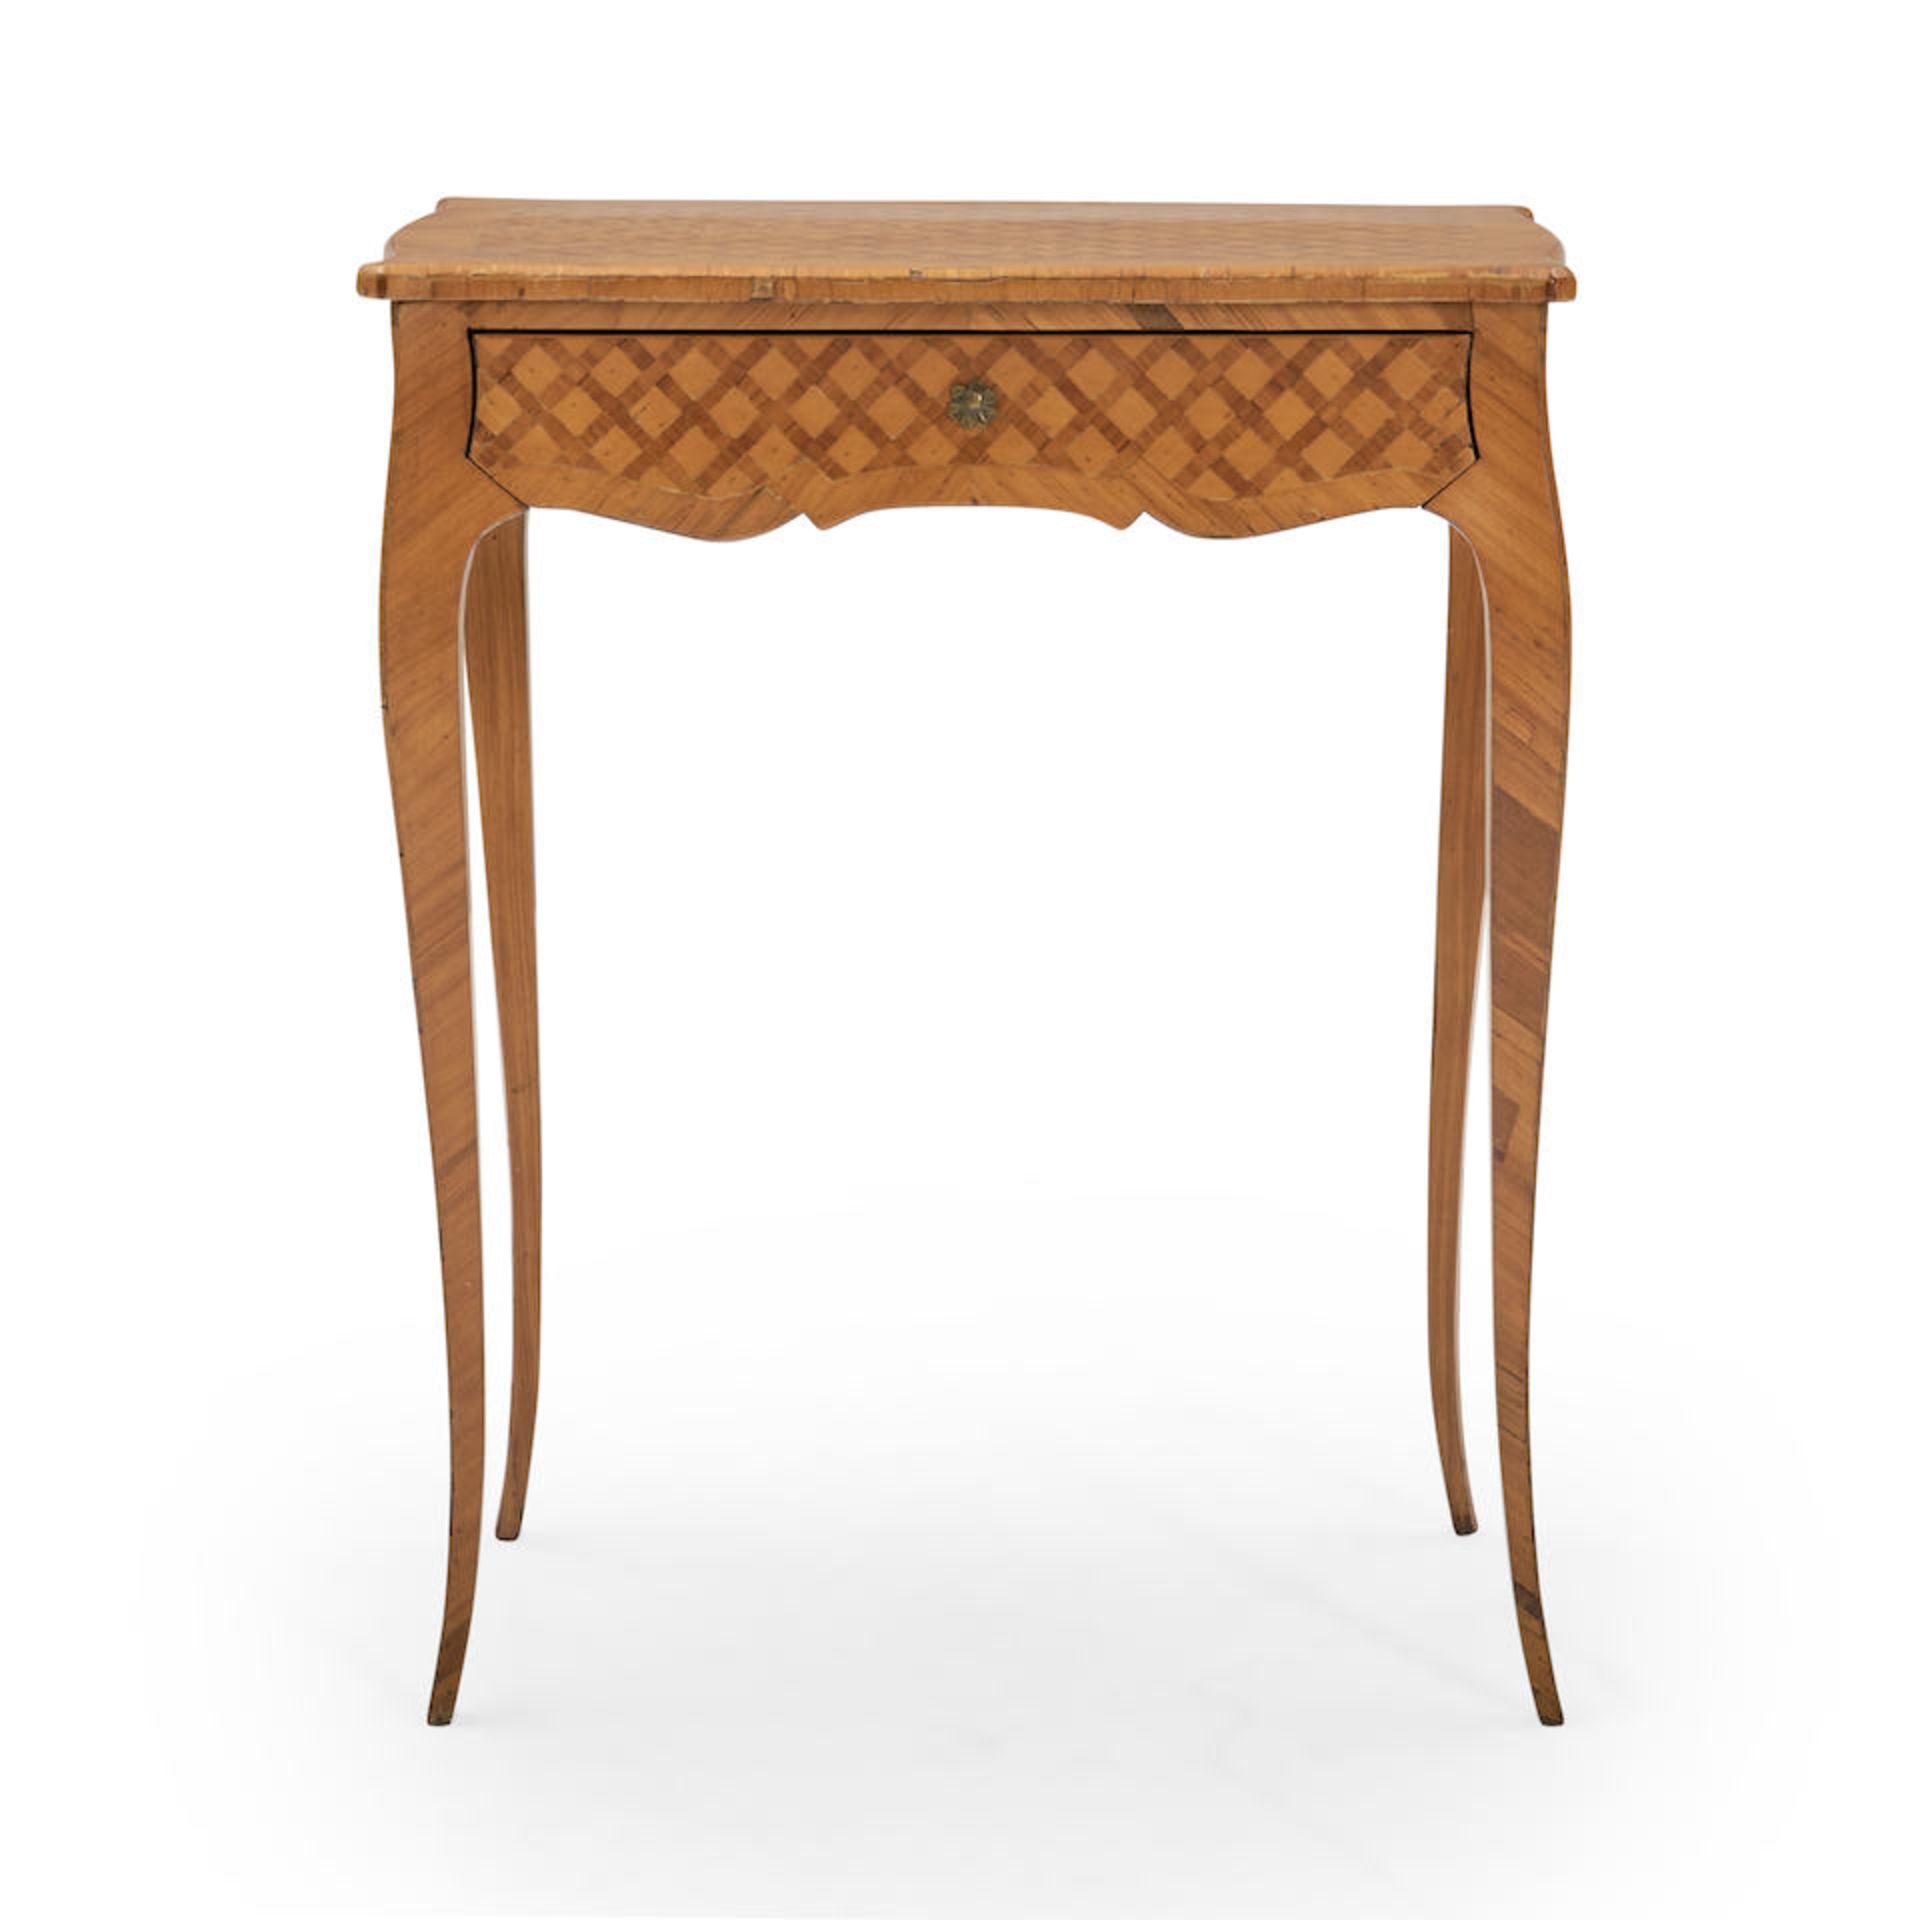 LOUIS XV-STYLE MARQUETRY ONE-DRAWER TABLE